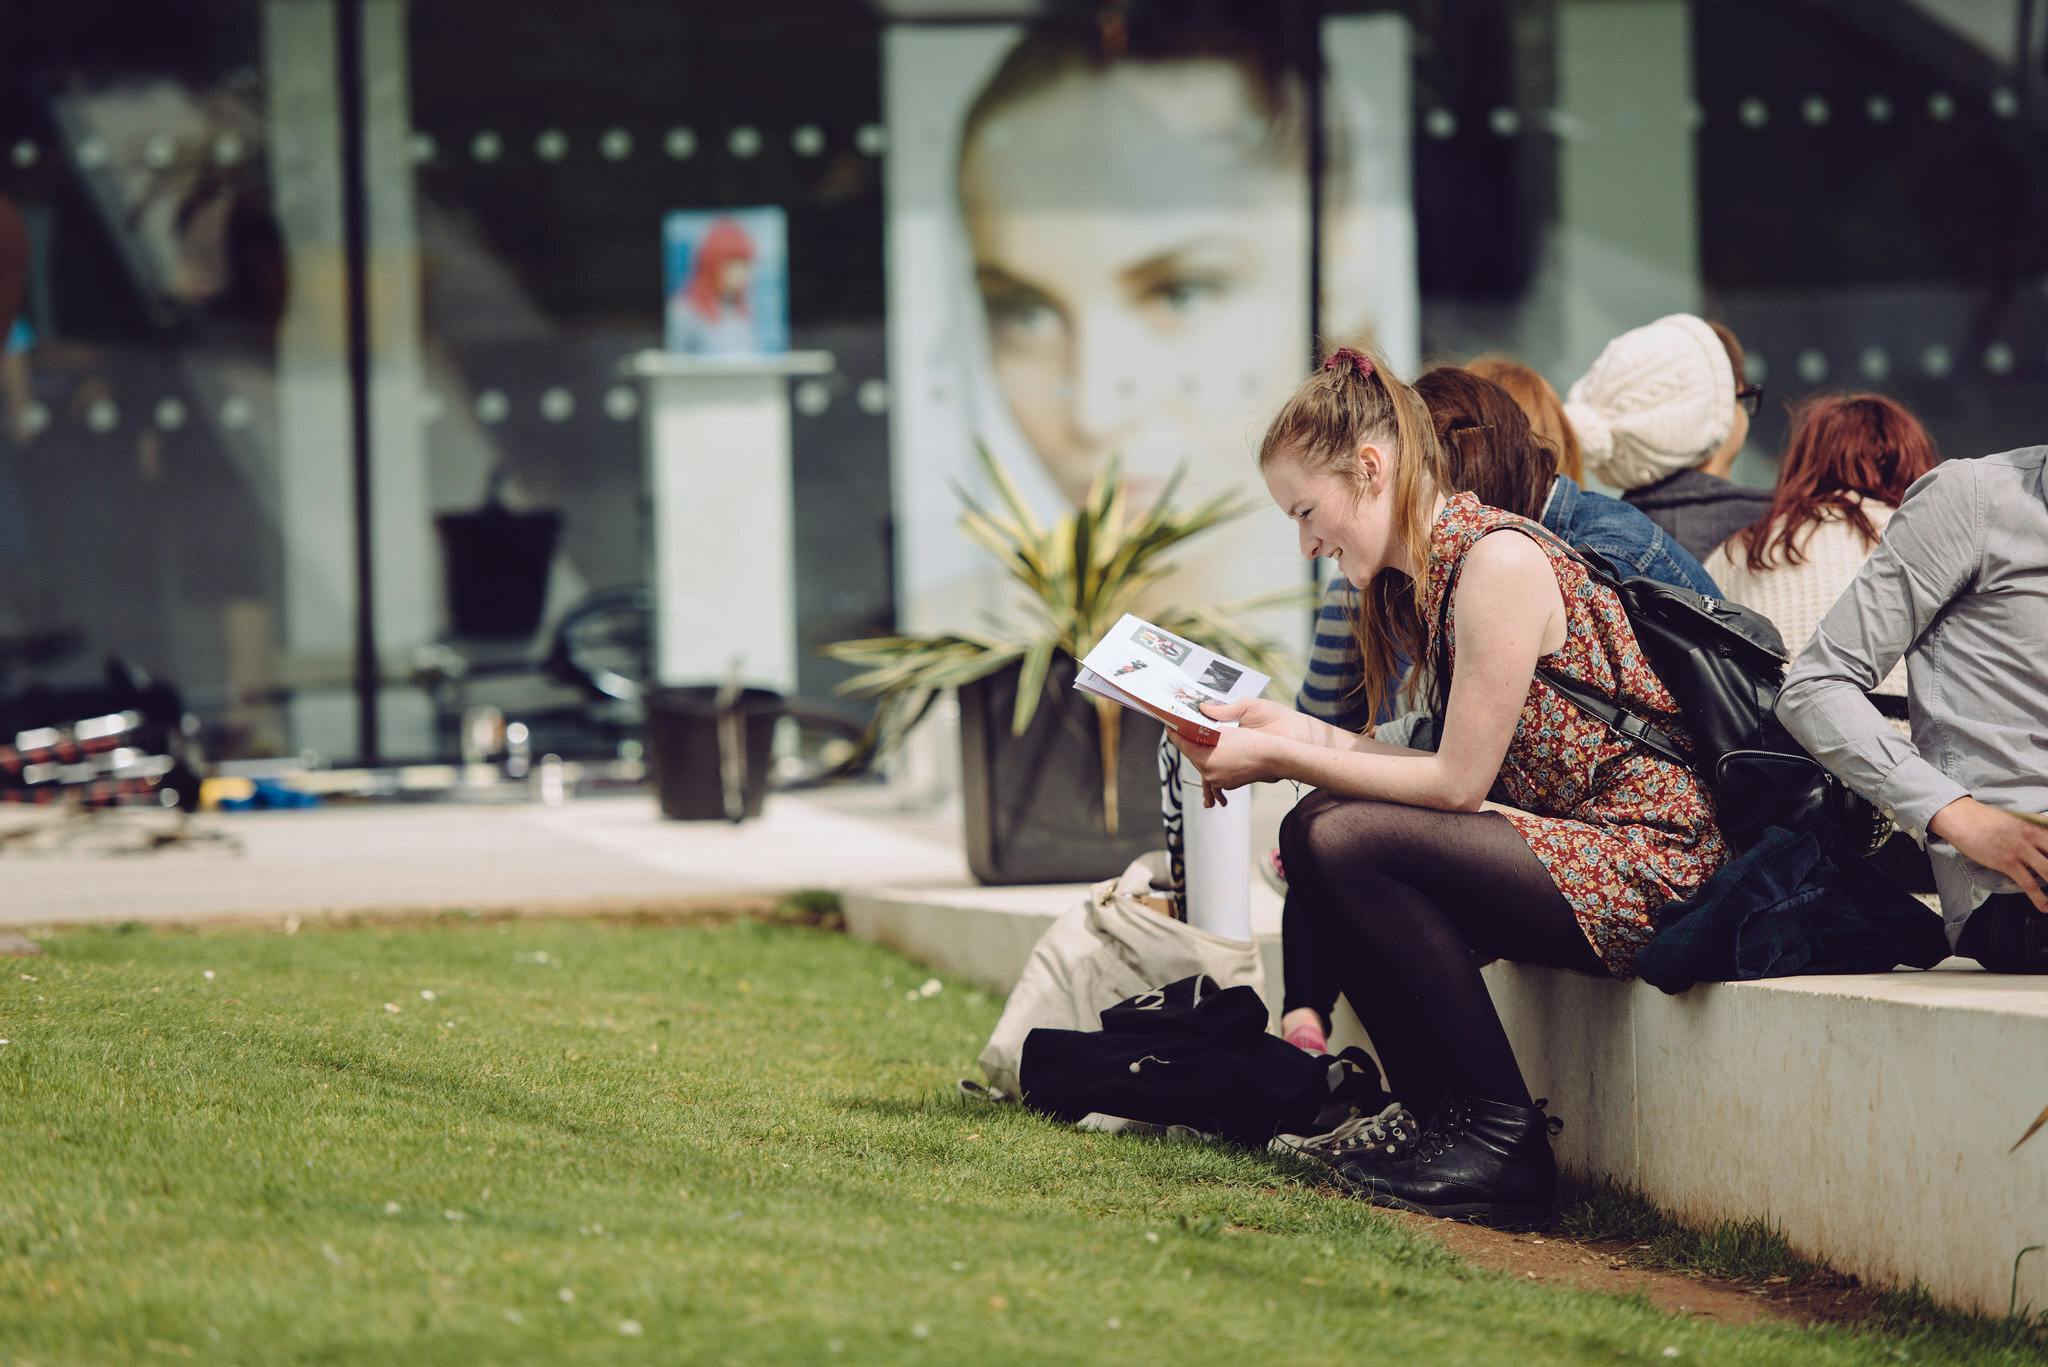 "A female student sits in a grassy area with fellow students on a concrete bench outside The Gallery window smiling whilst reading"